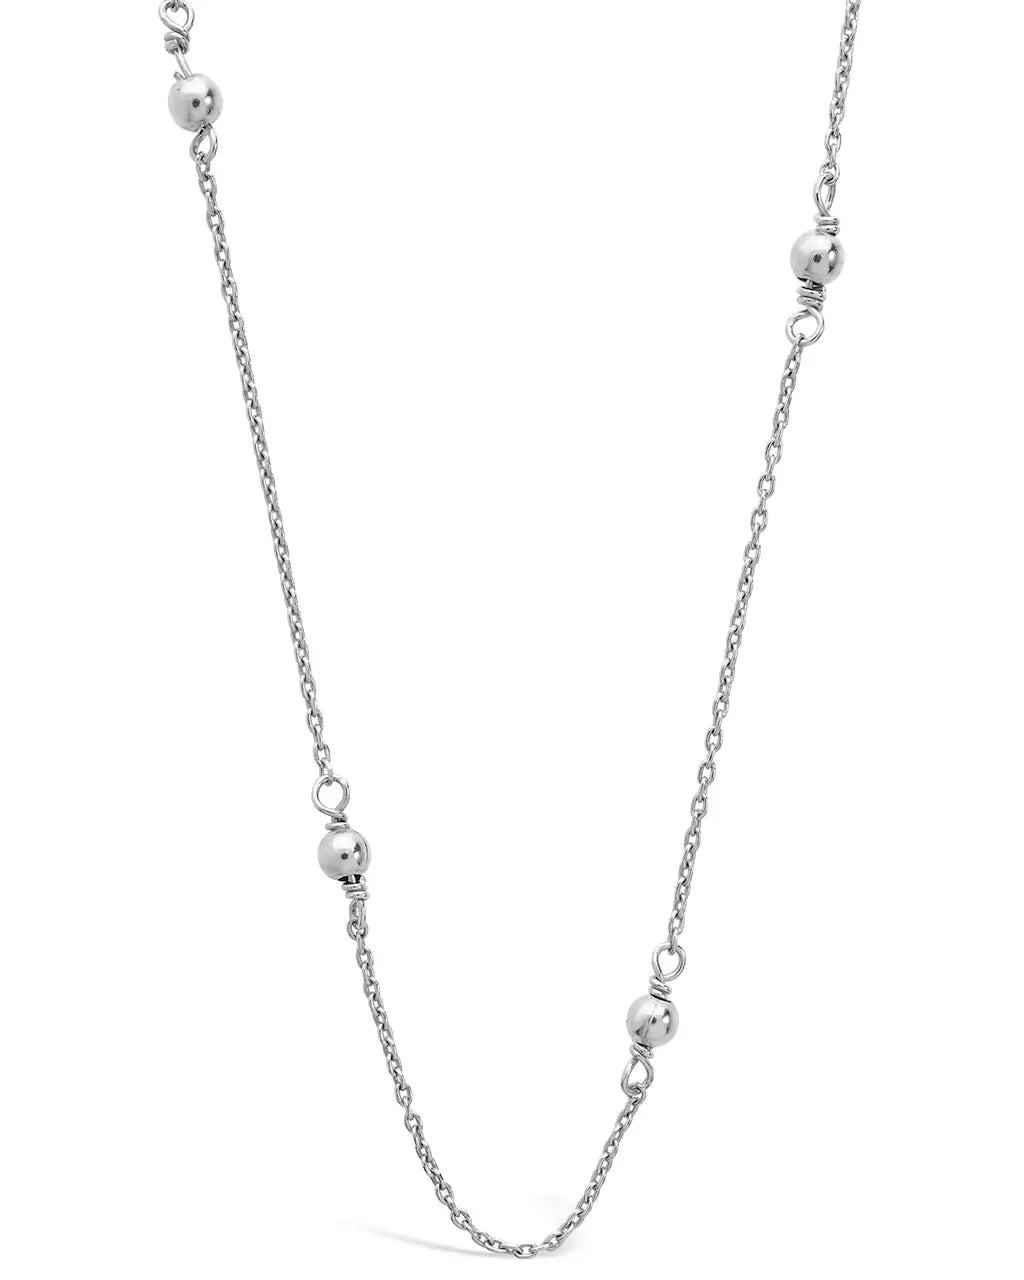 Sterling Silver Beaded Necklace Necklace Sterling Forever Silver 